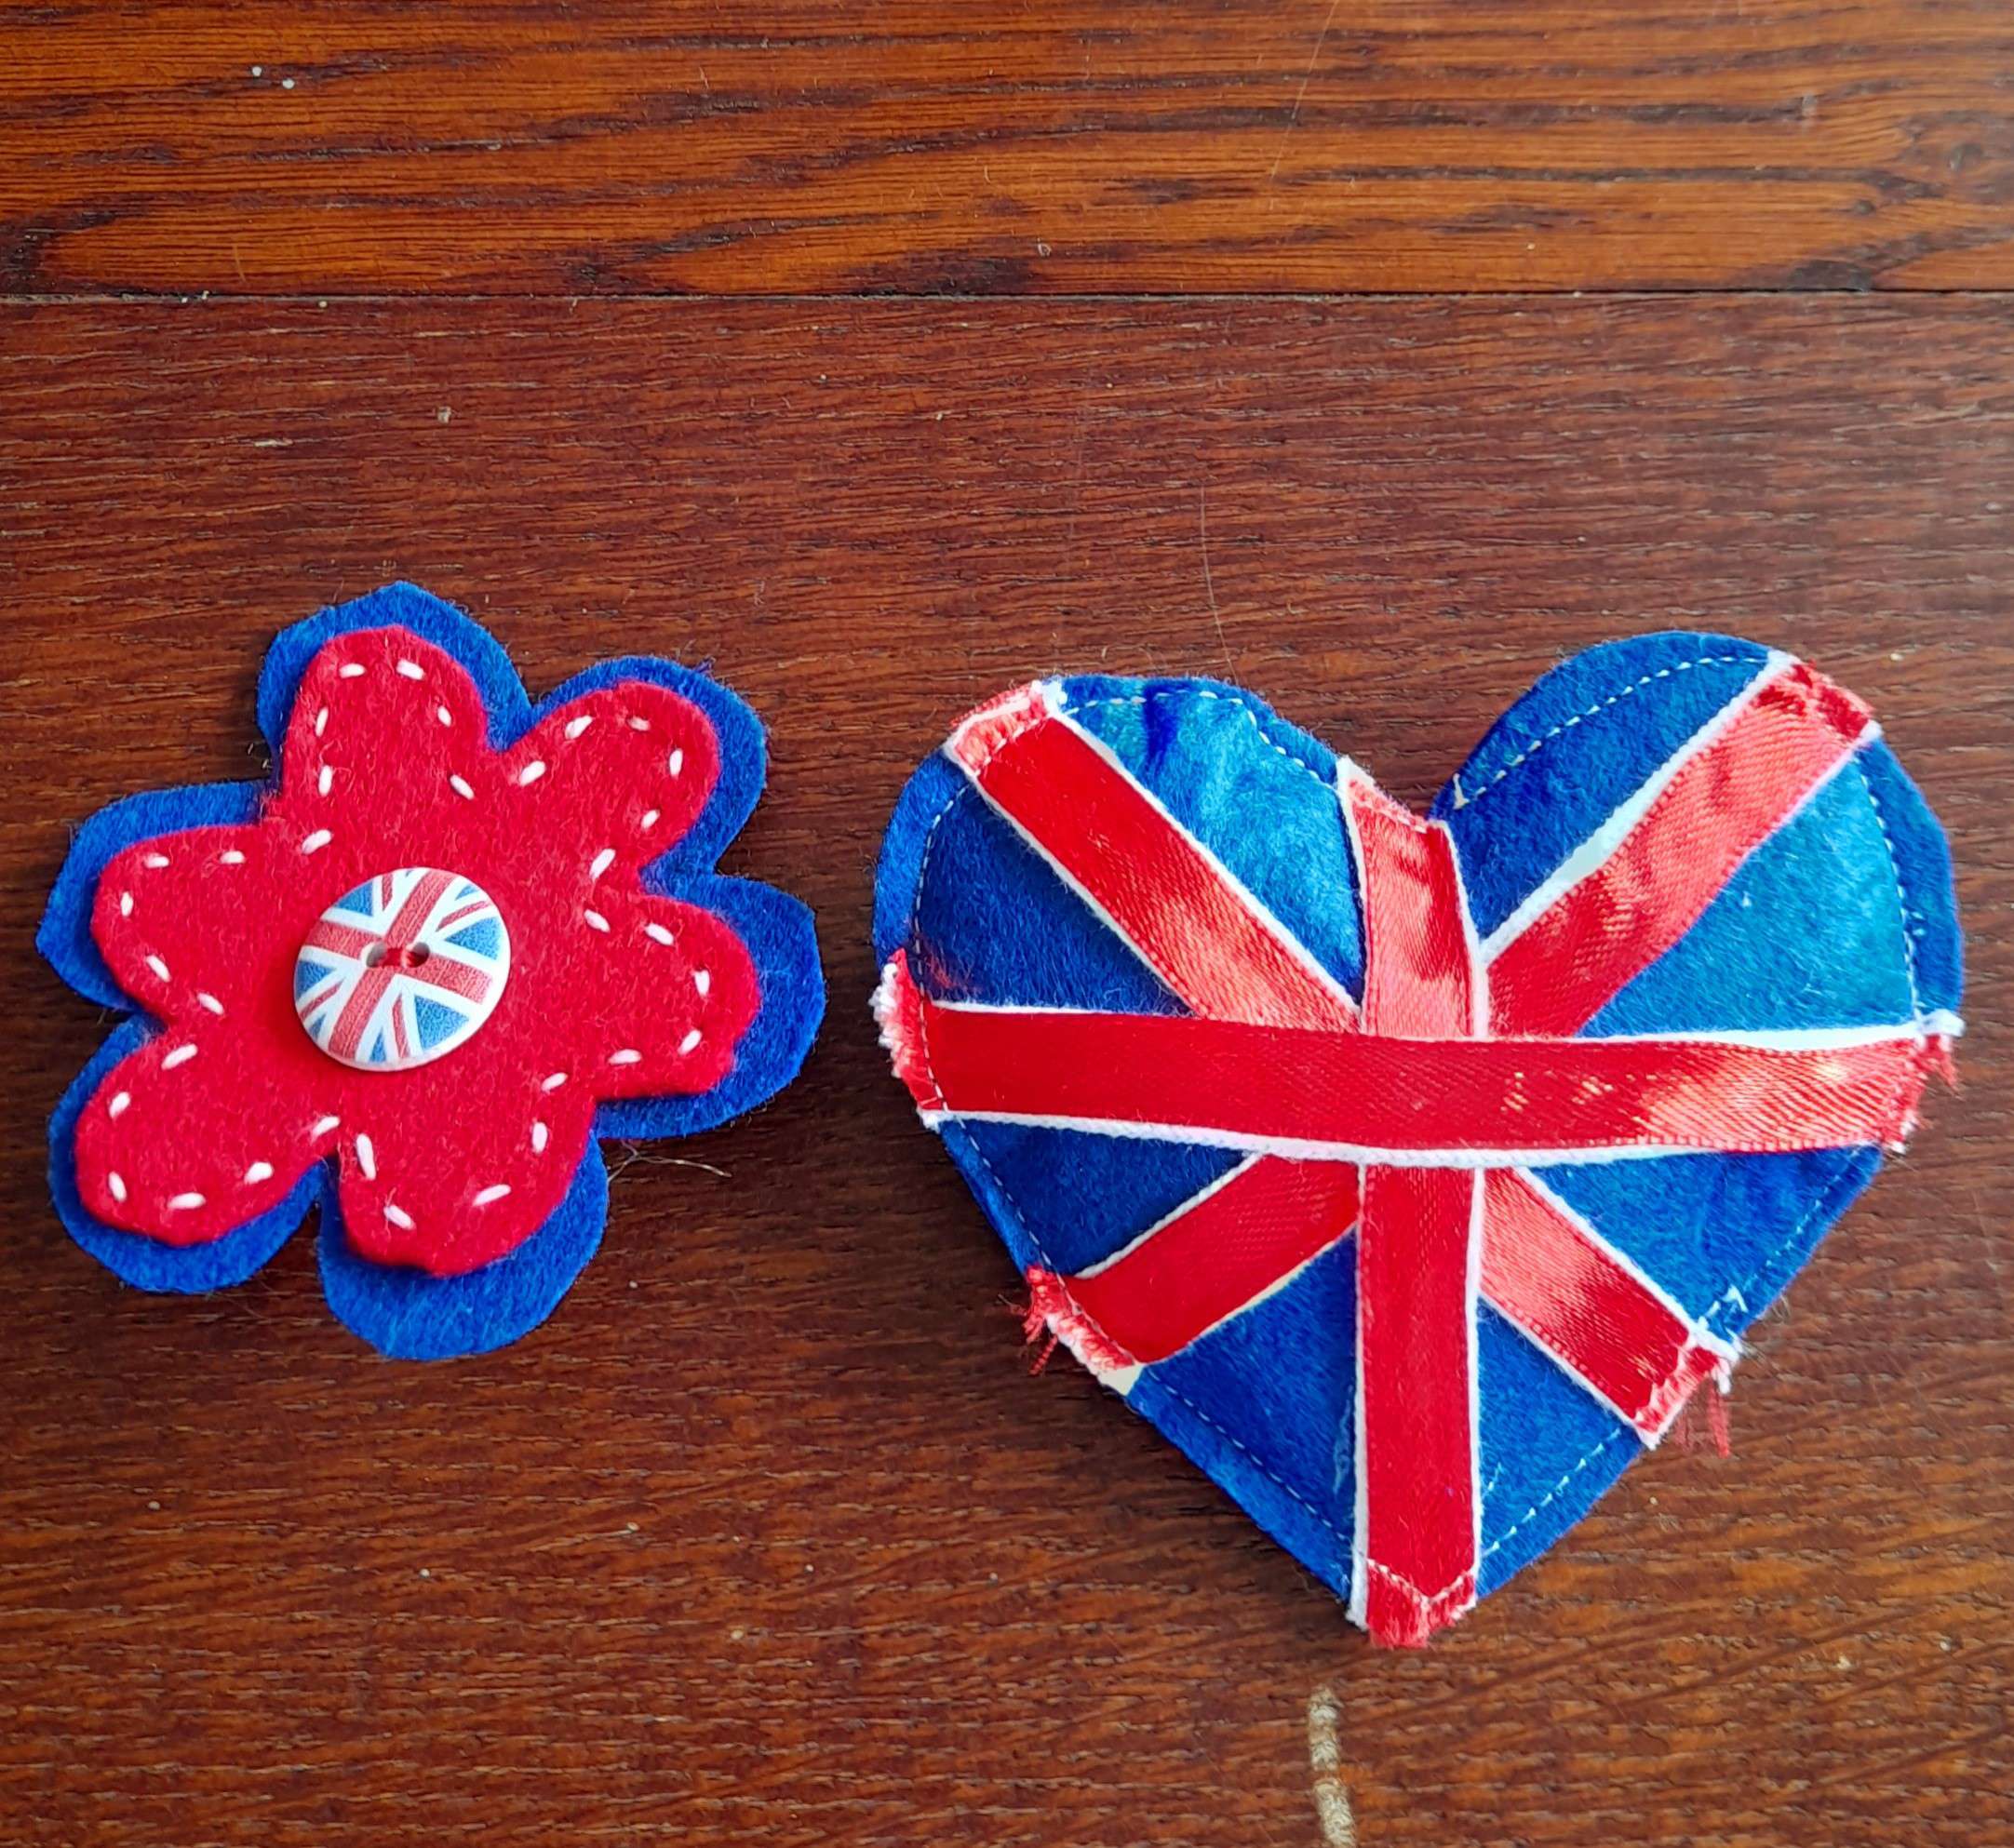 Two handmade union jack Jubilee themed gifts by Kate Nisbet